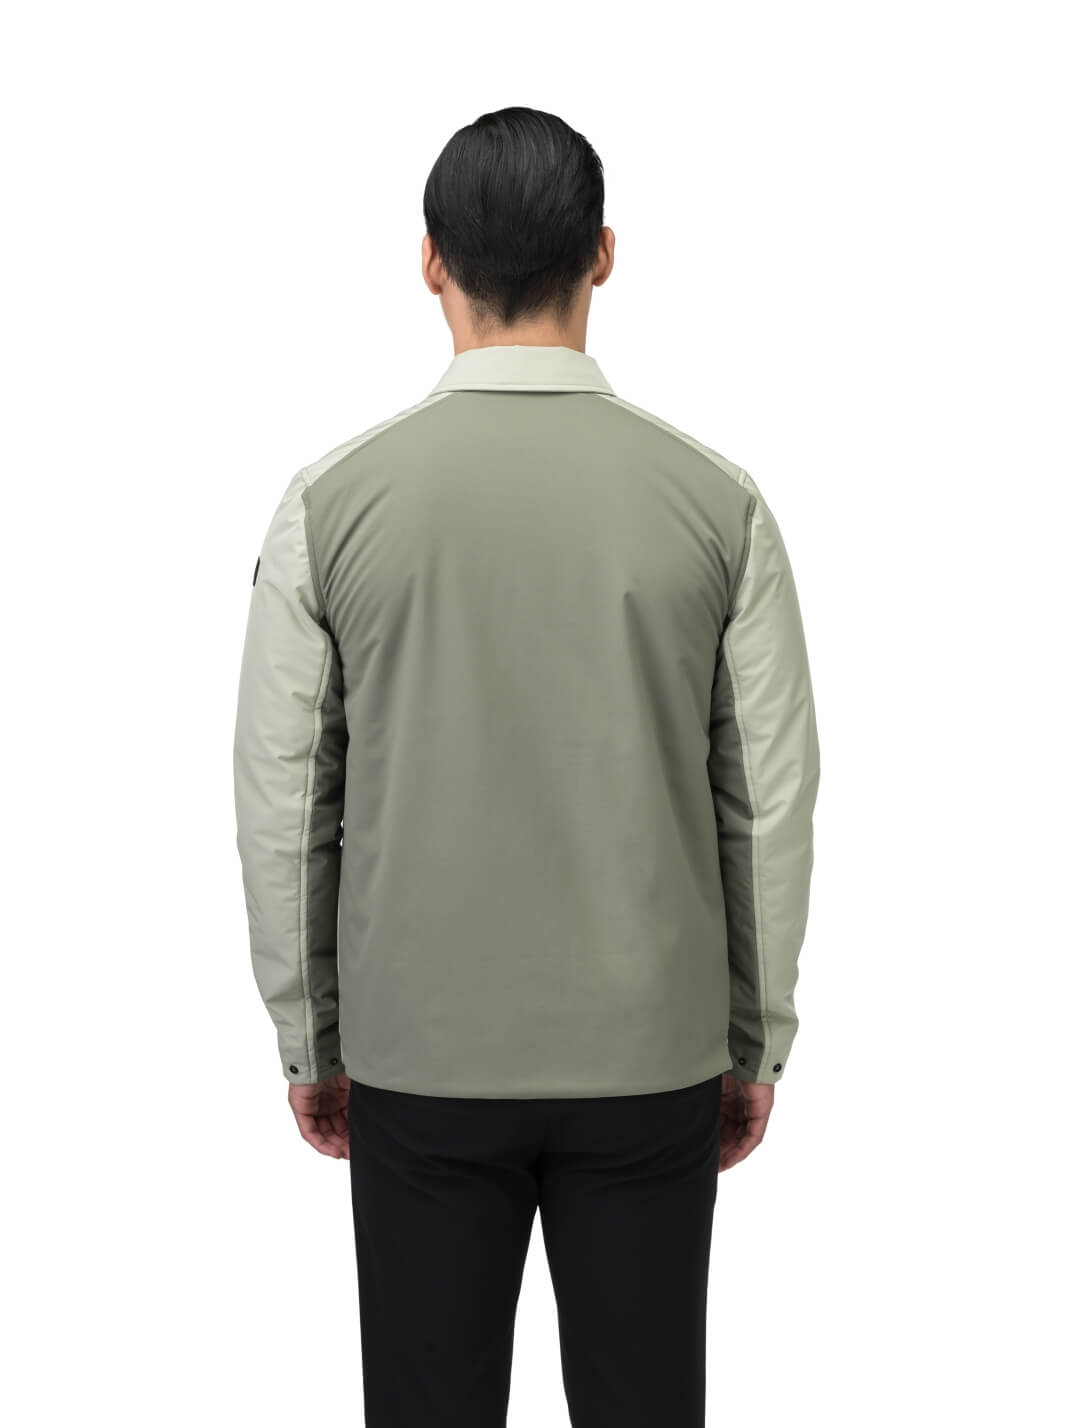 Men's Tops, Mid-layers & T-Shirts